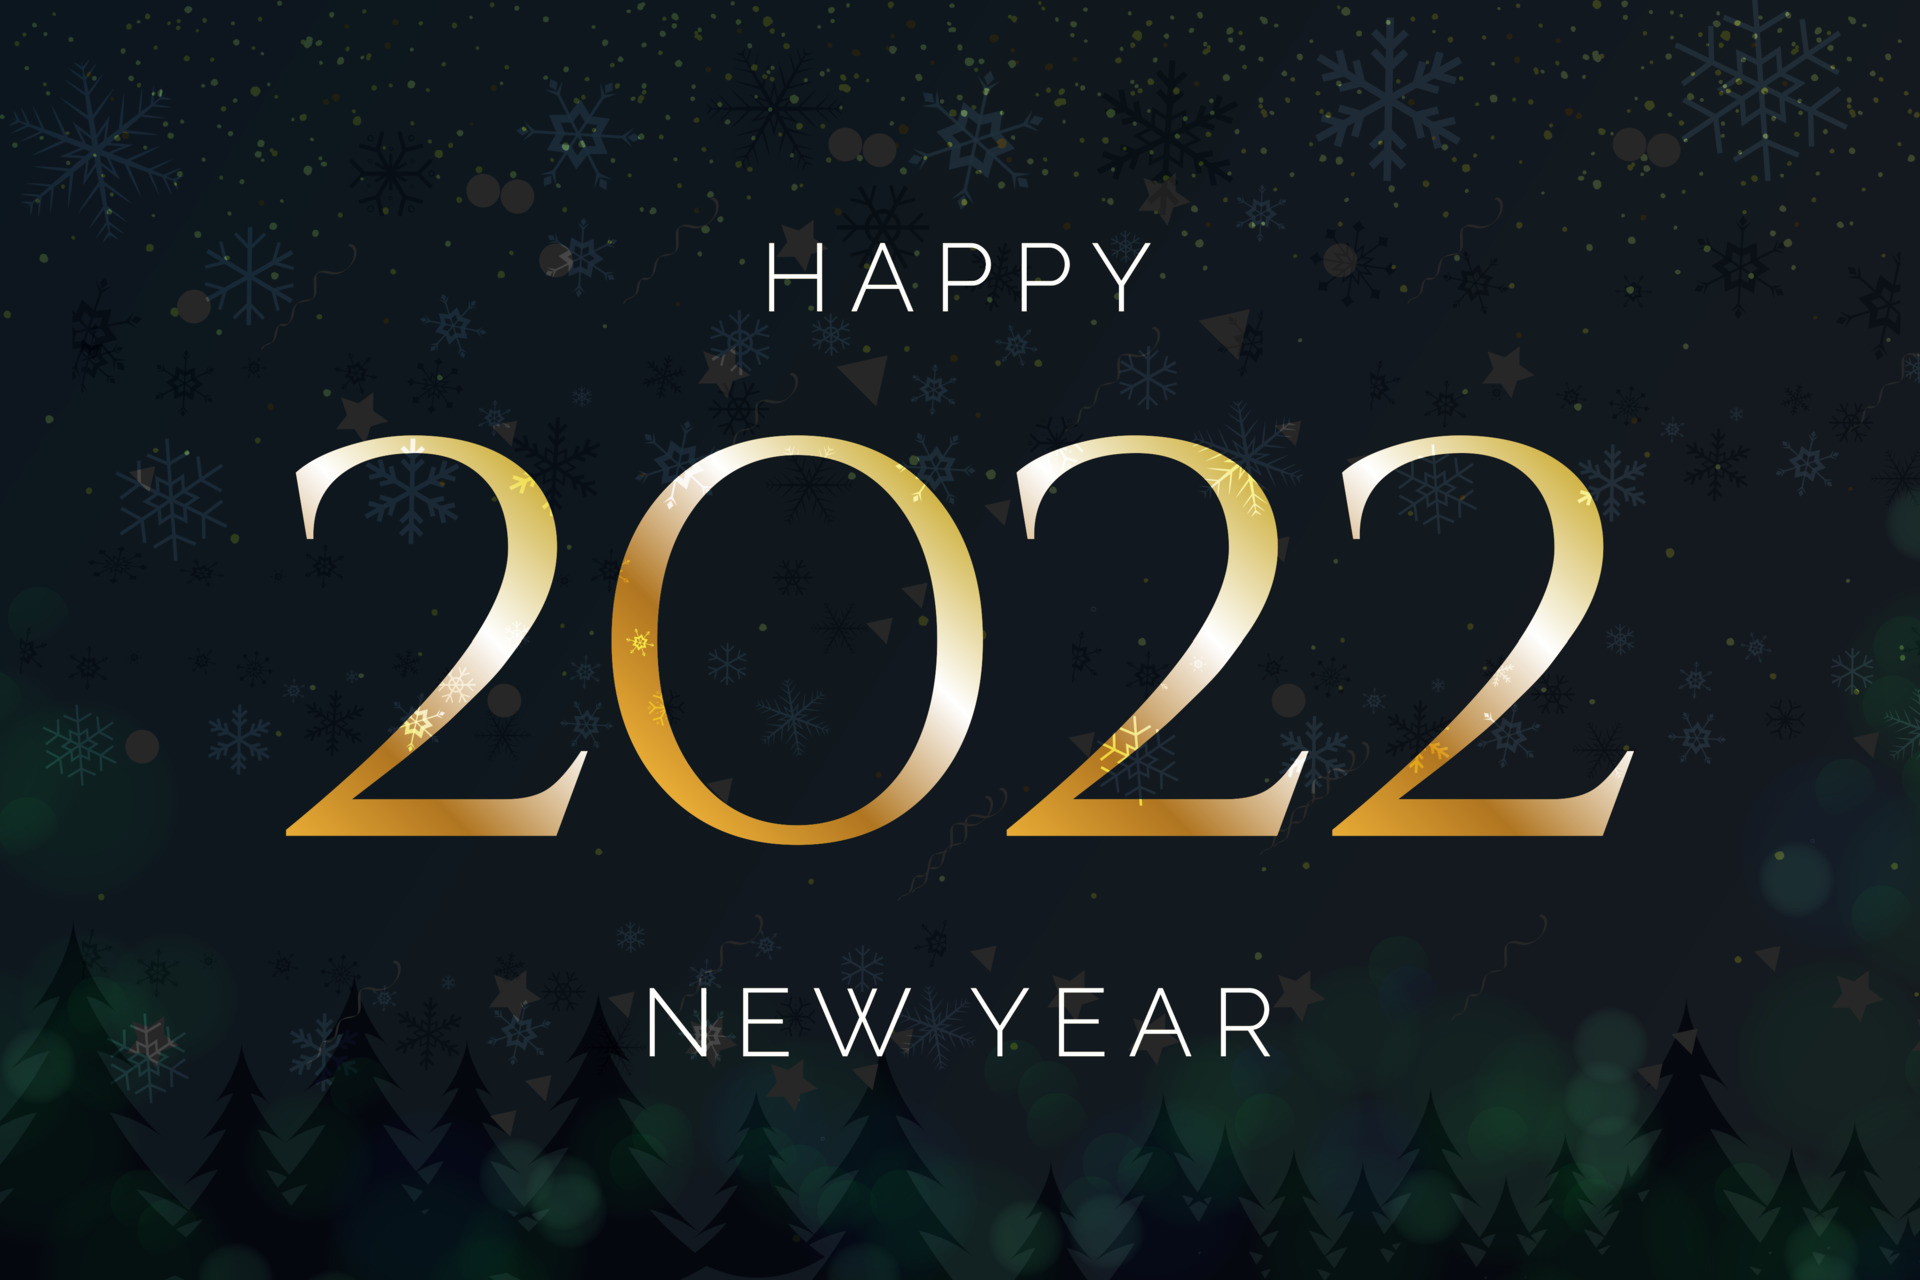 Happy new year 2022 wishes greetings